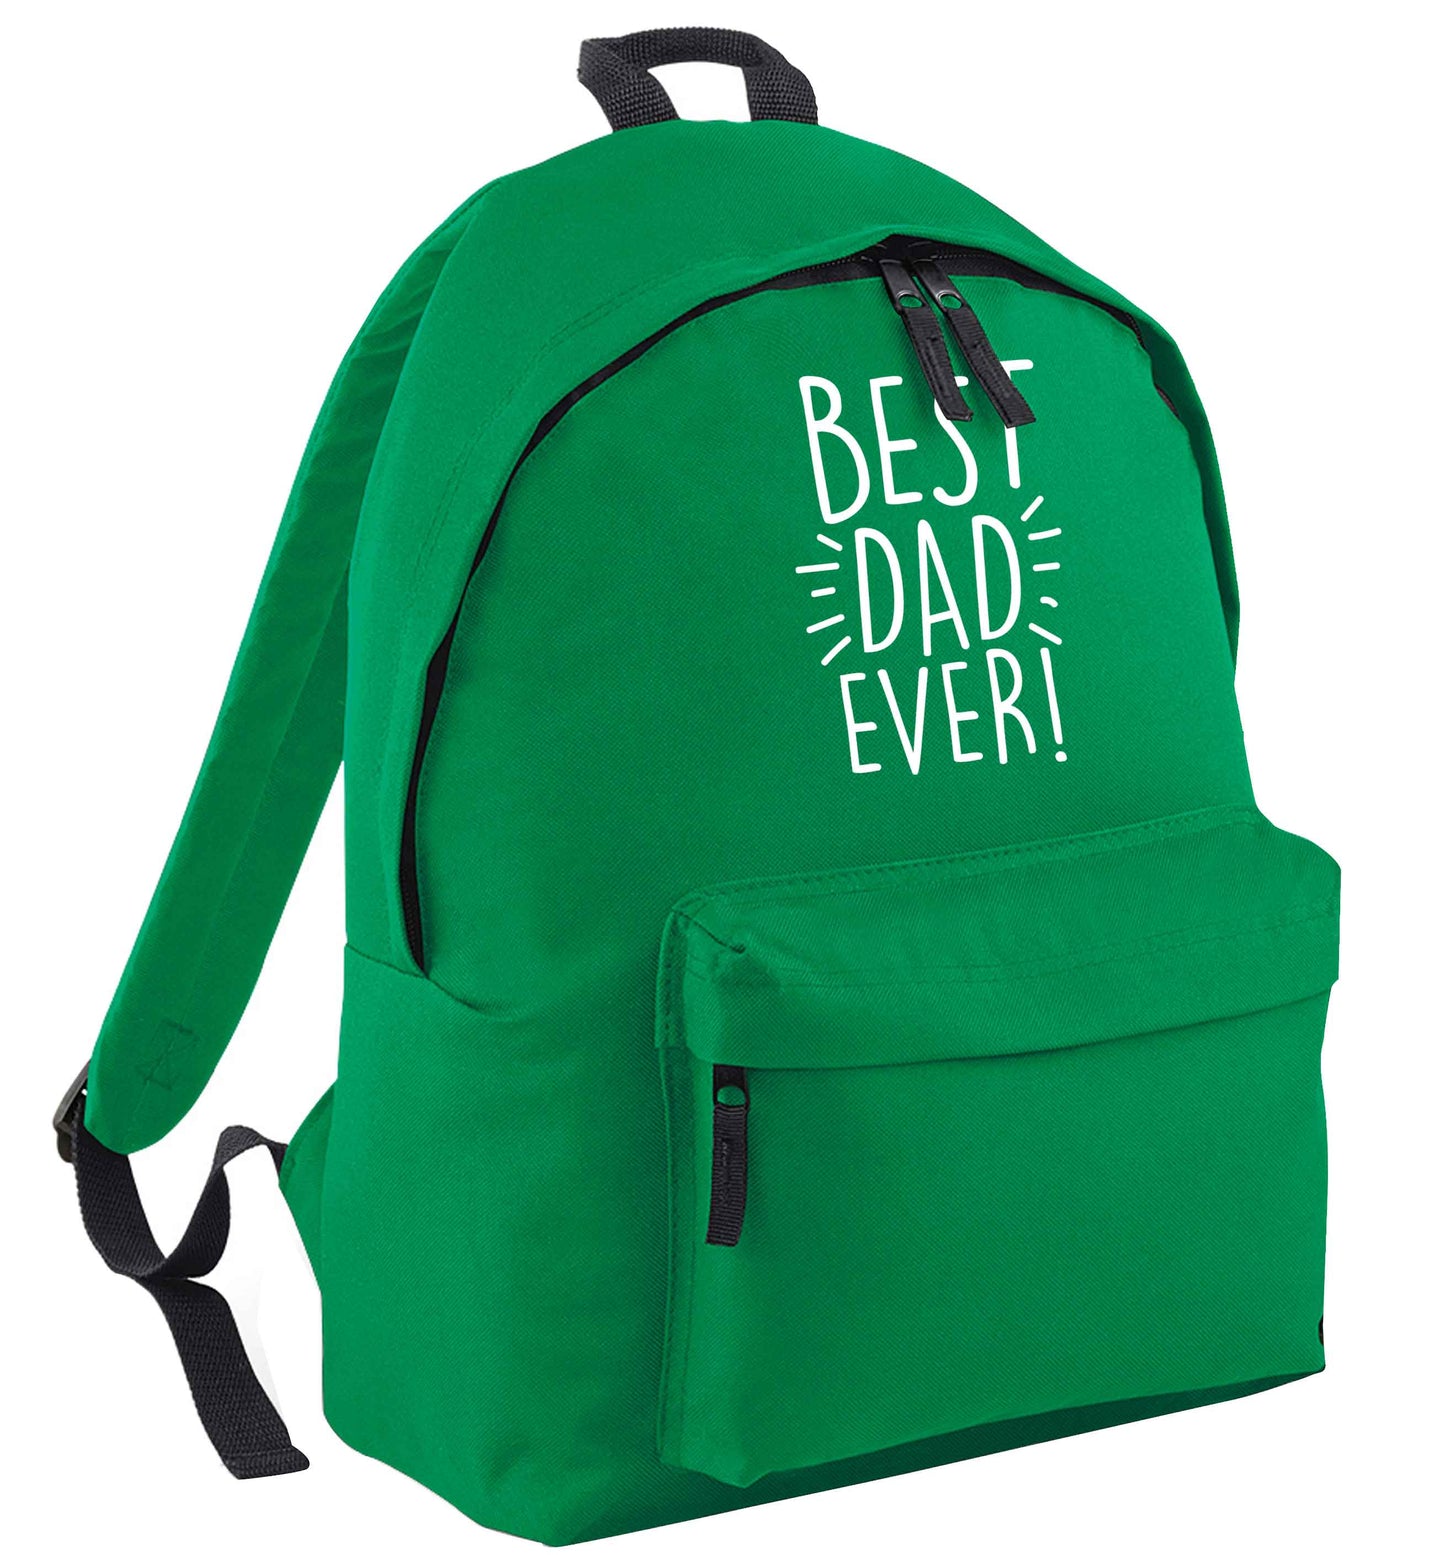 Best dad ever! green adults backpack